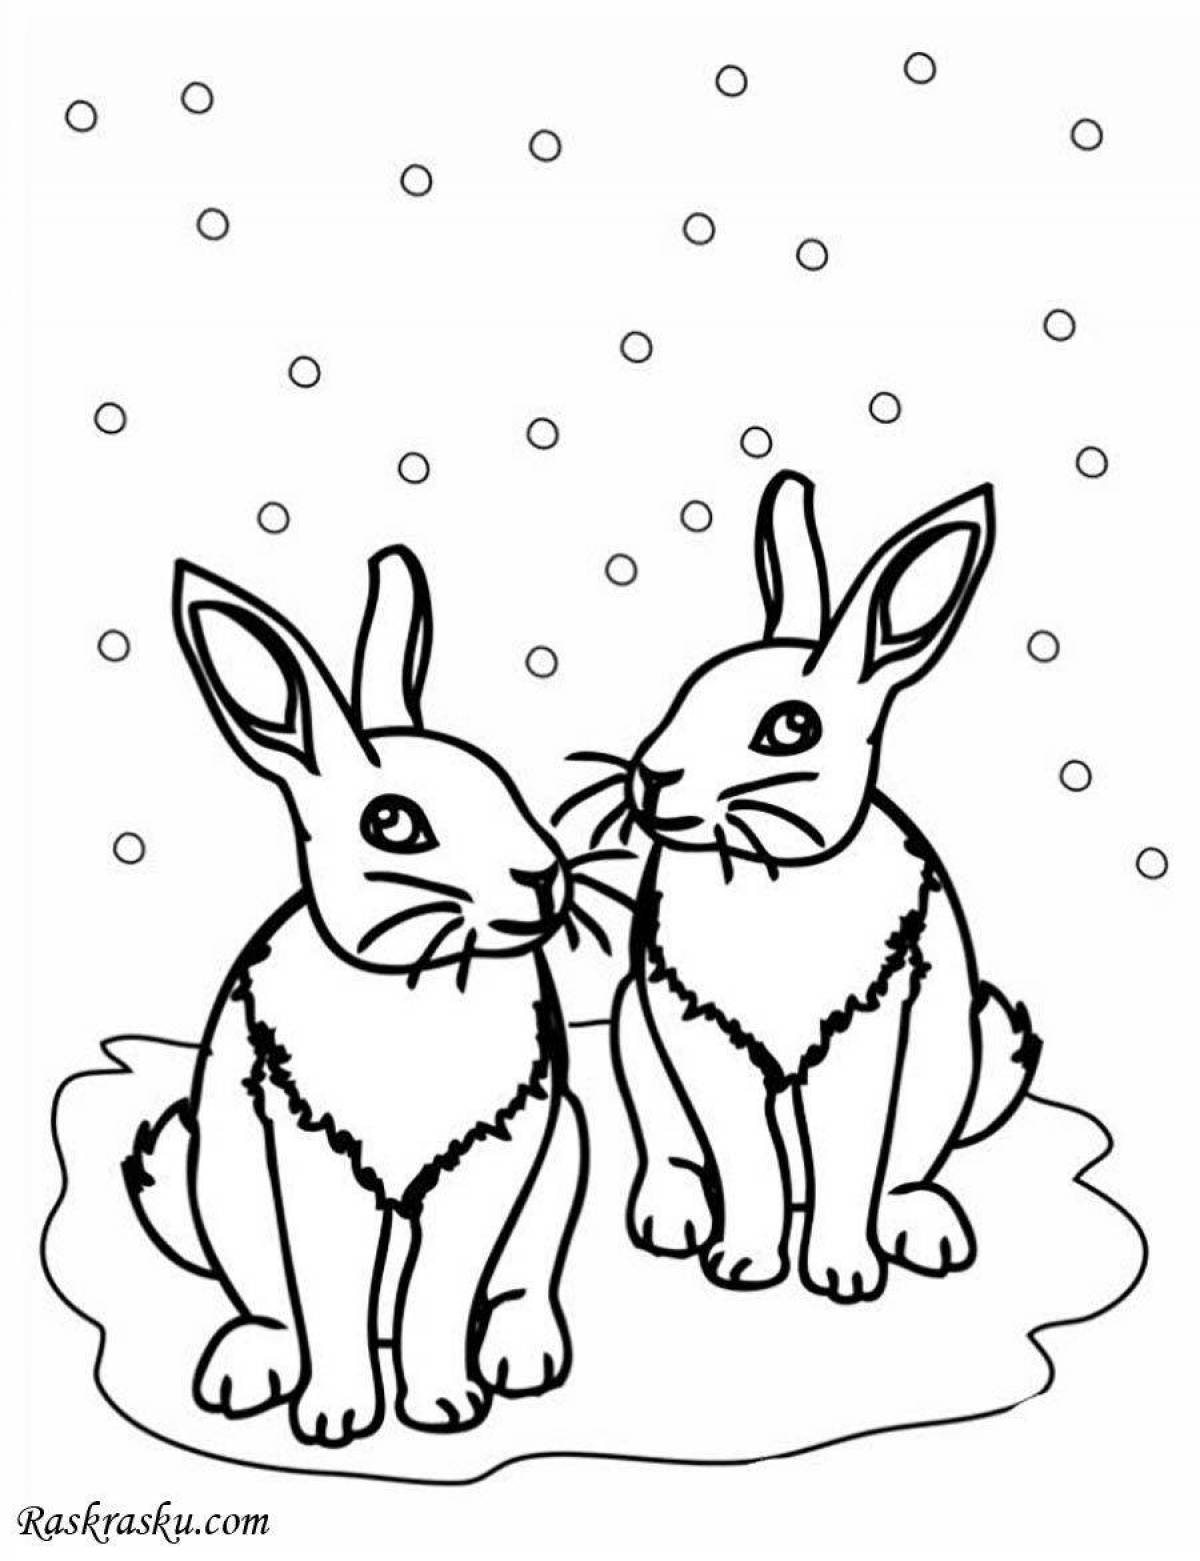 Glitter animal coloring pages in winter